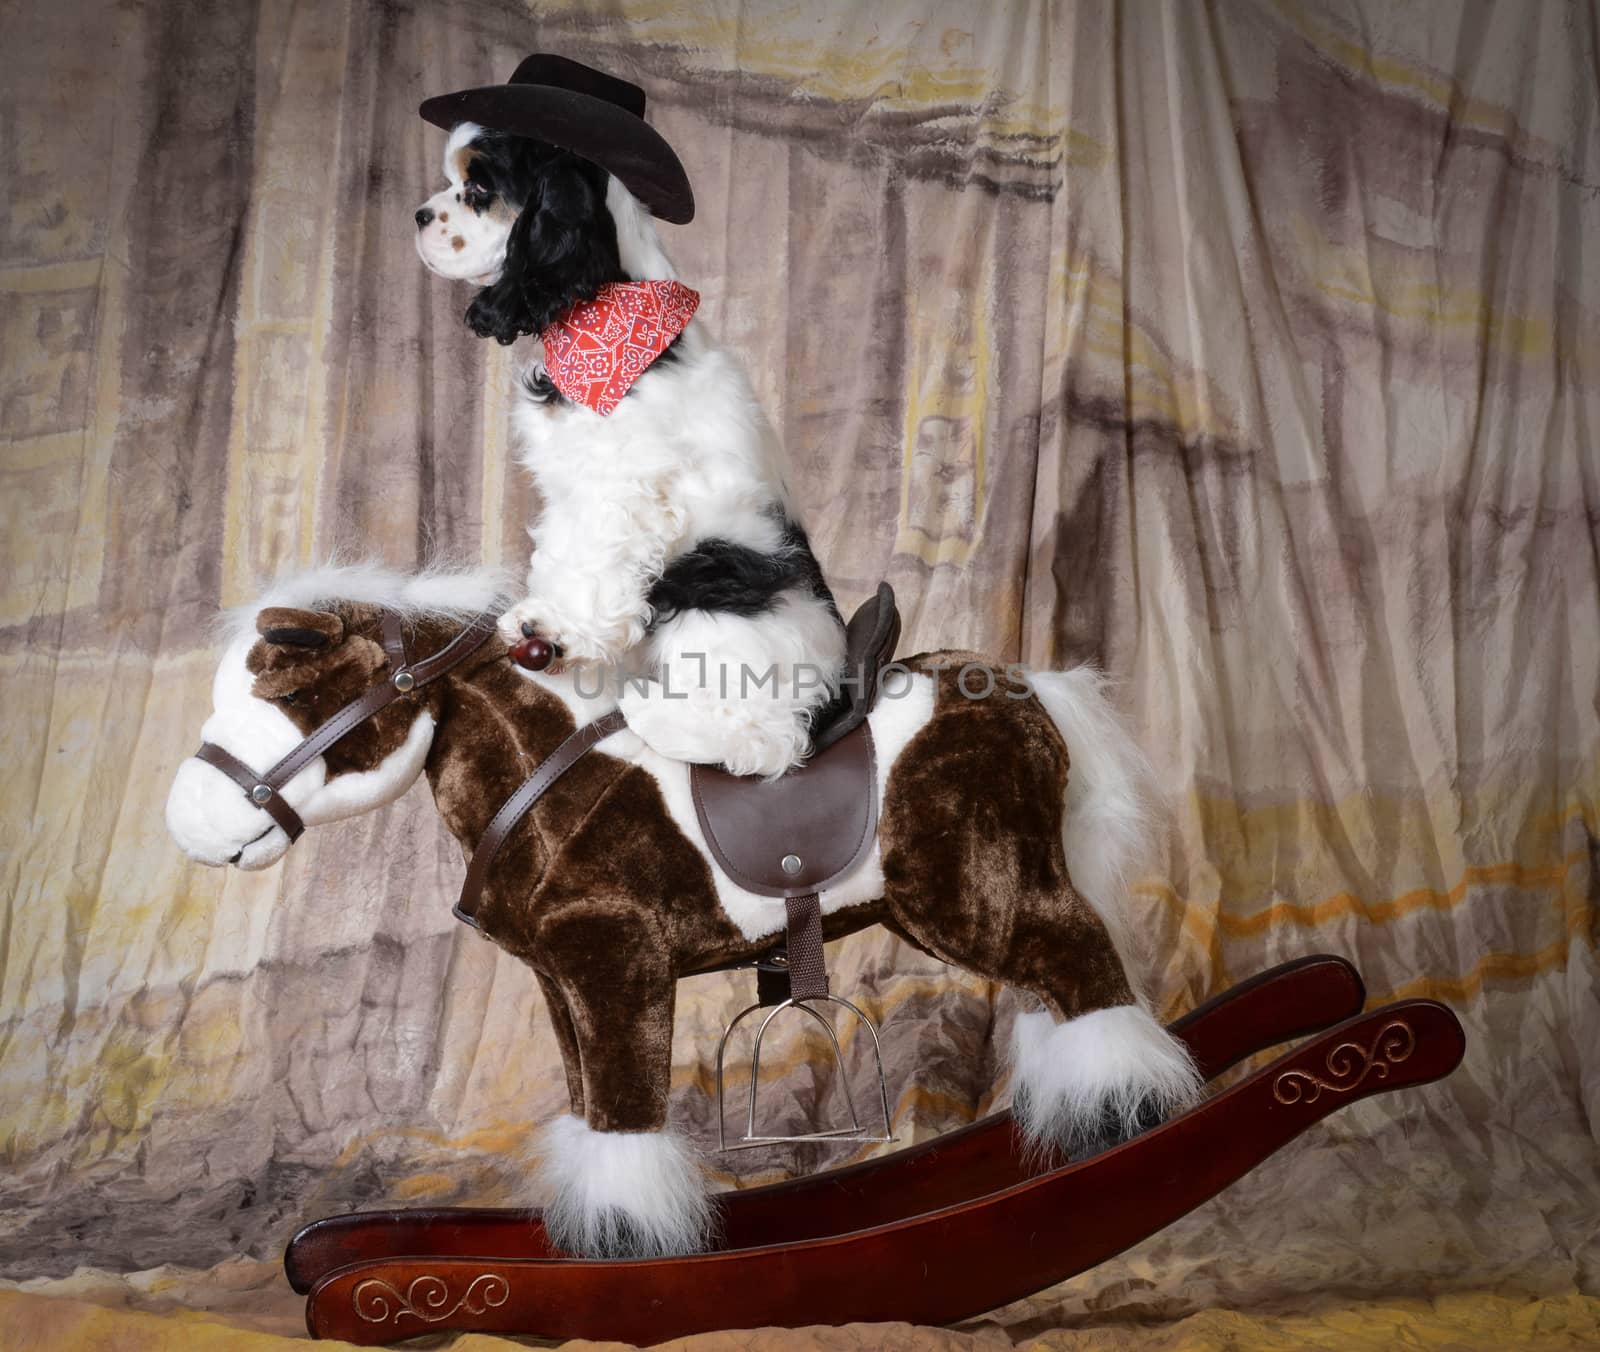 dog riding a horse by willeecole123